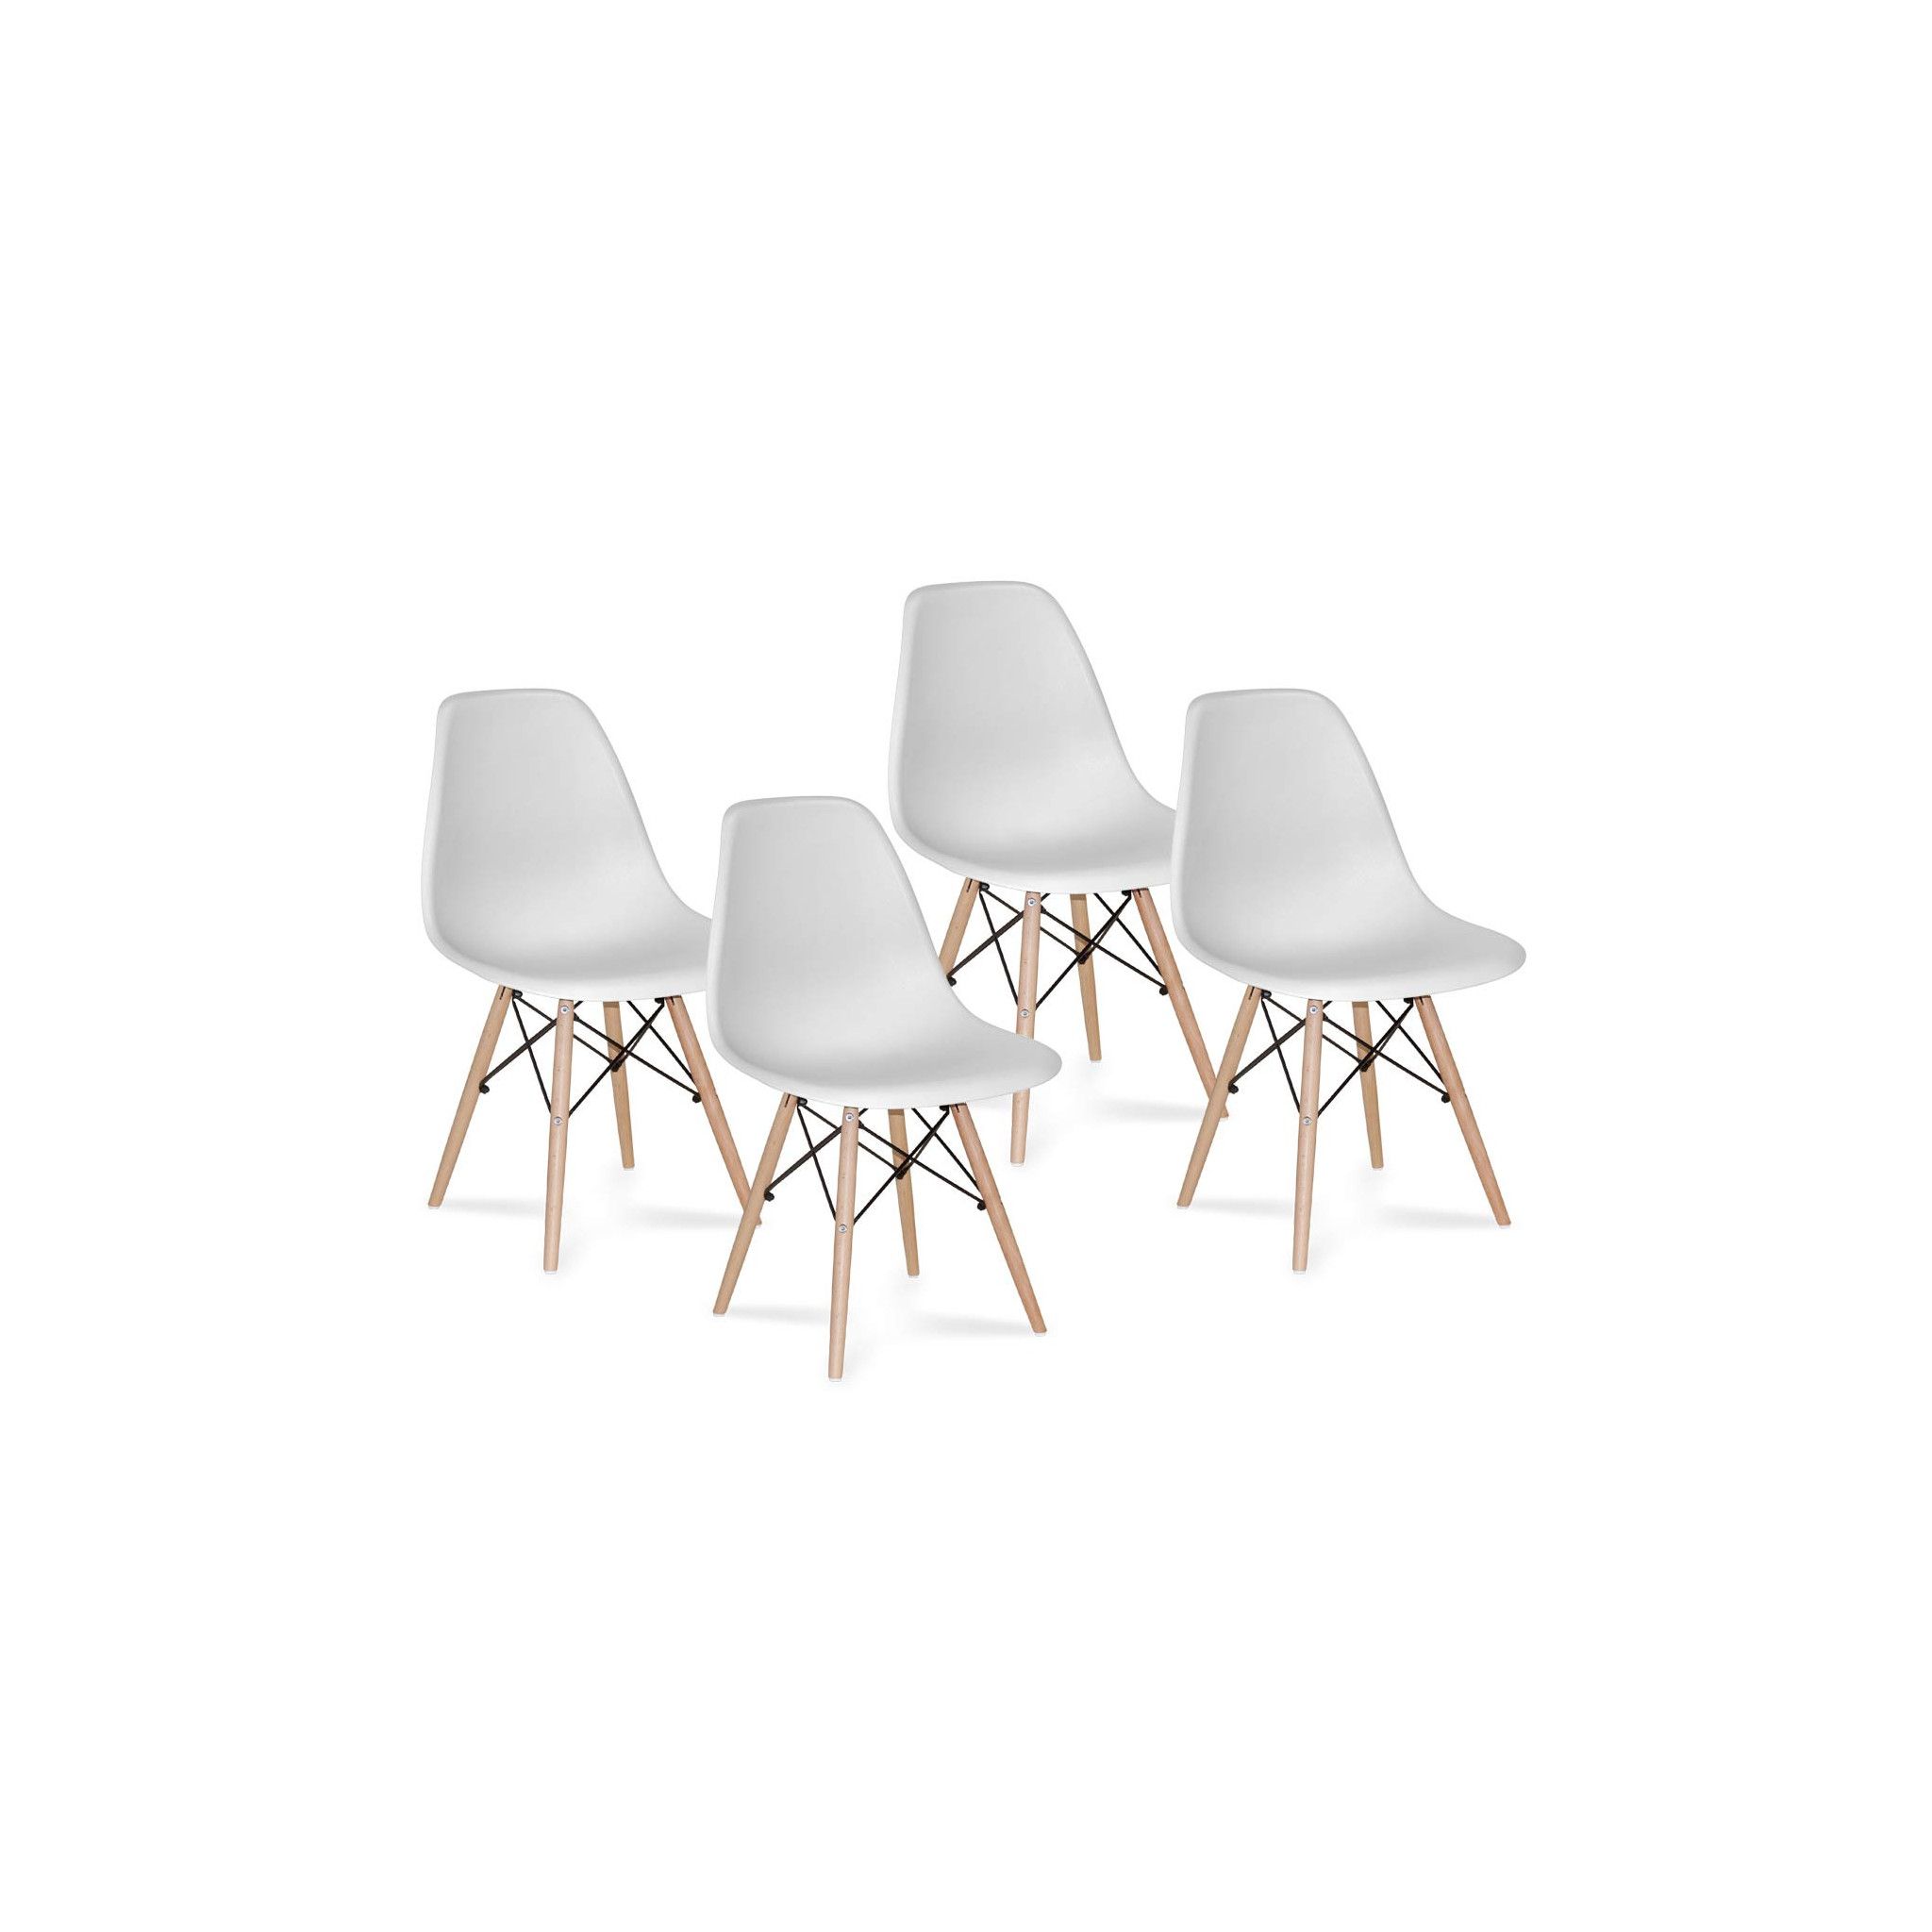 PACK 4 CHAISES TOWER WOOD EXTRA QUALITY